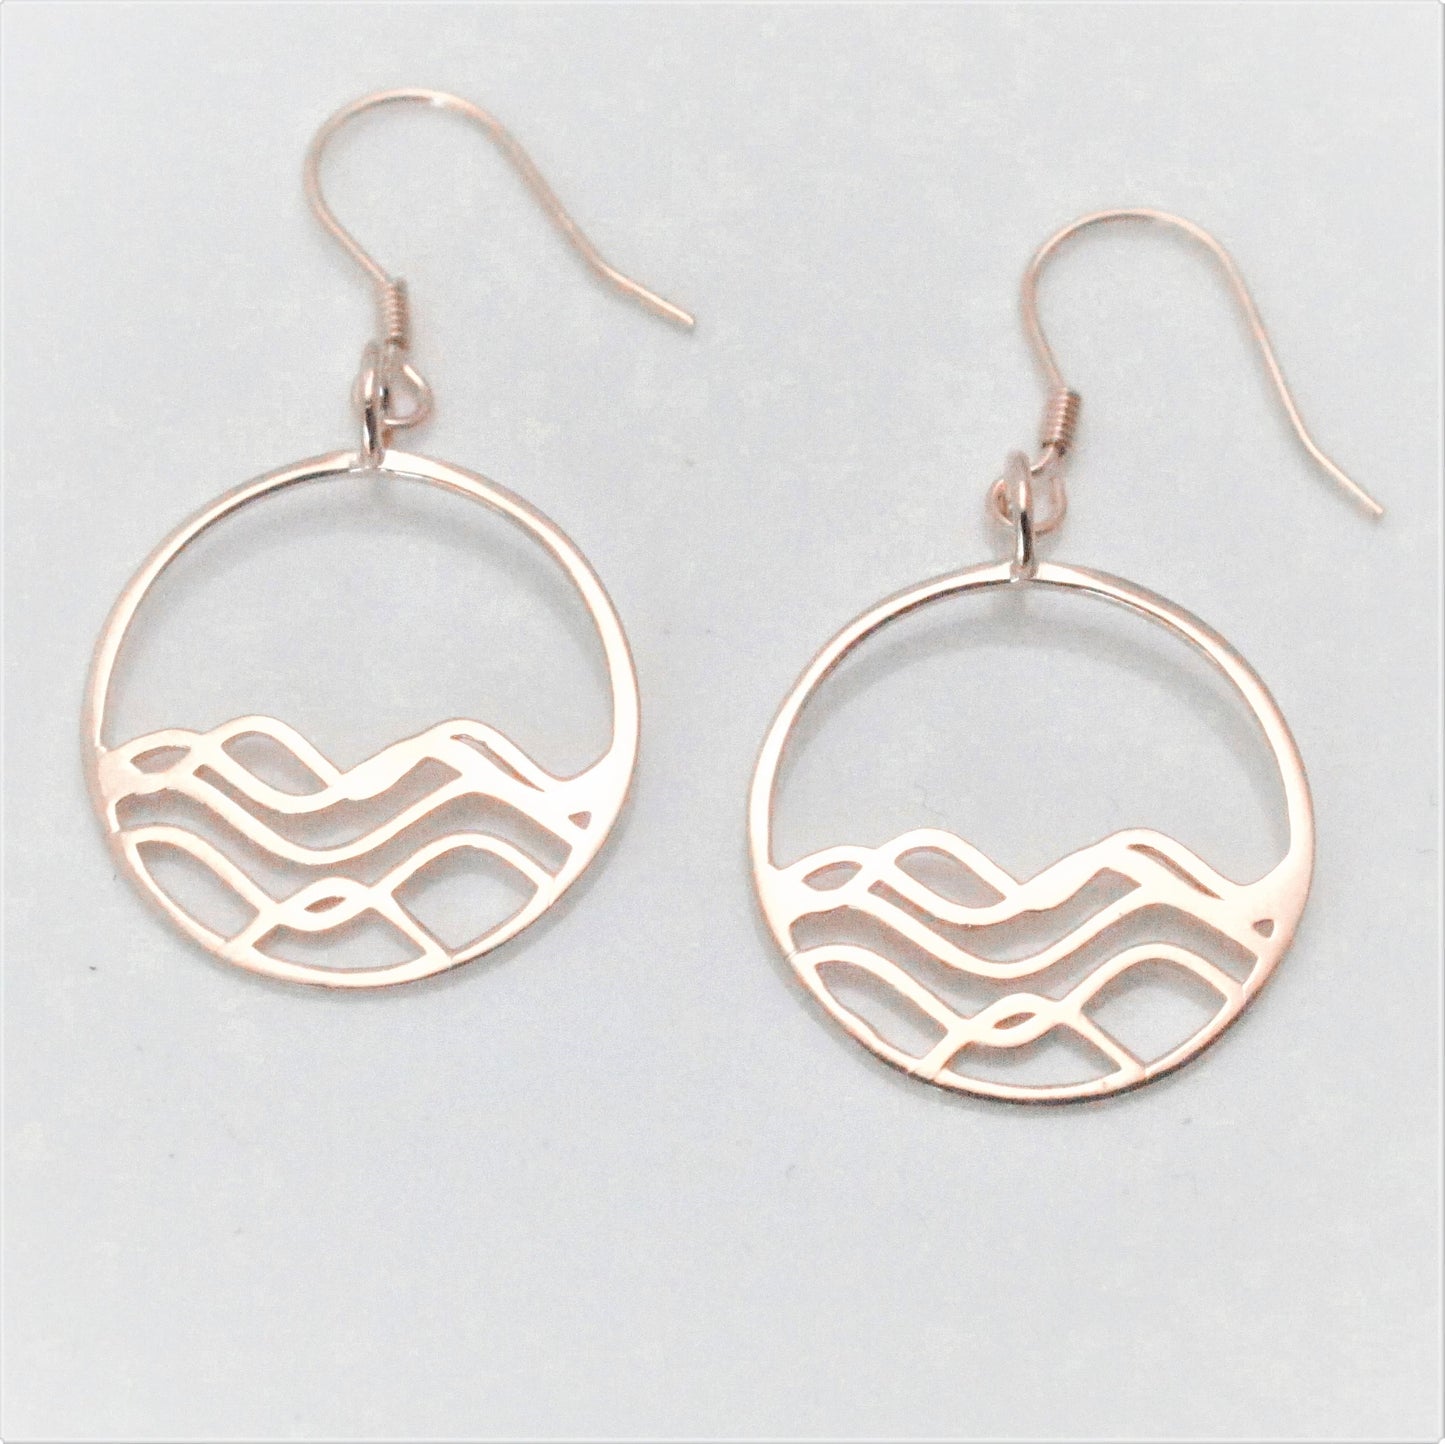 18k rose gold plated 925 sterling silver petite high tide circle earrings on a white background